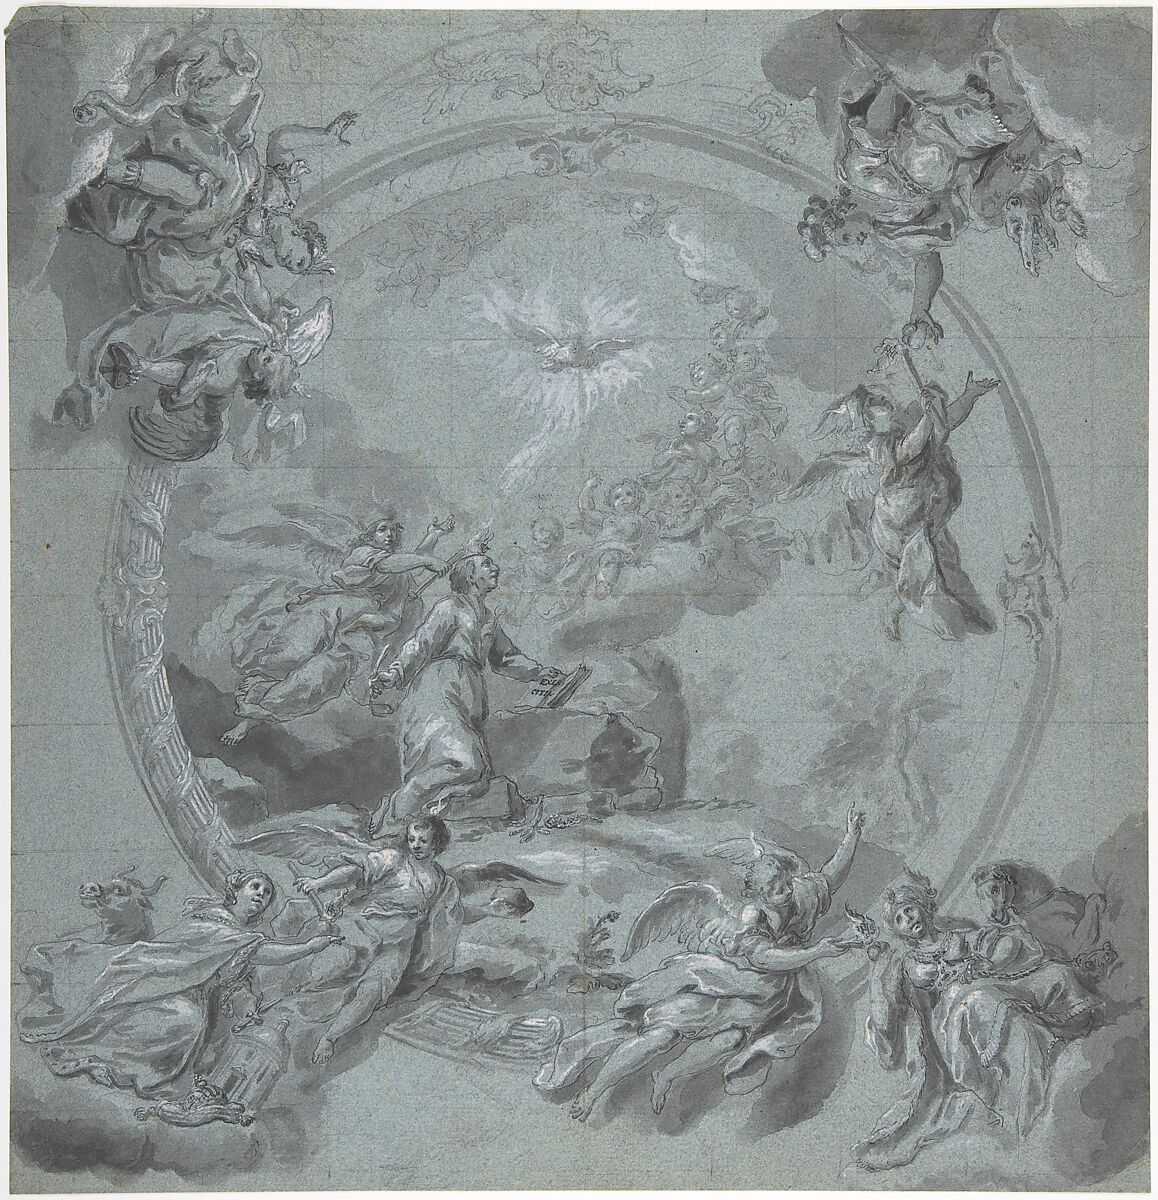 Saint Ignatius of Loyola and Allegories of the Four Continents, Felix Anton Scheffler (German, Munich 1701–1760 Prague), Pen and black ink, gray wash, heightened with white, over black chalk, on blue paper 